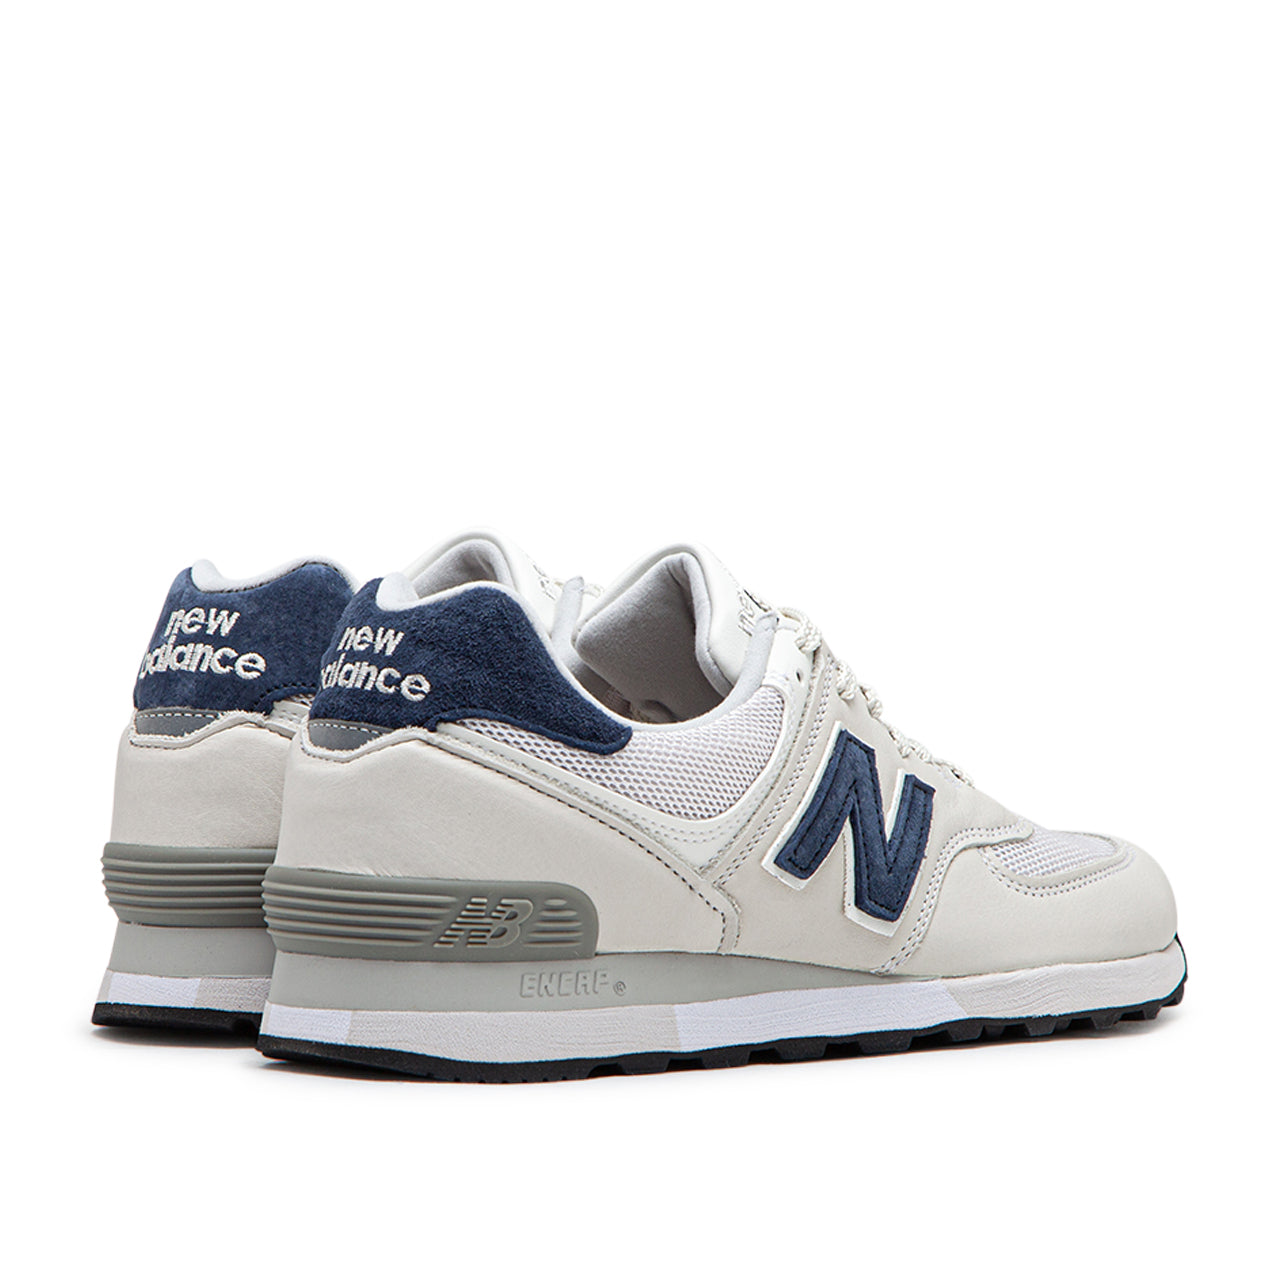 New Balance OU576LWG Made in UK (White / Navy)